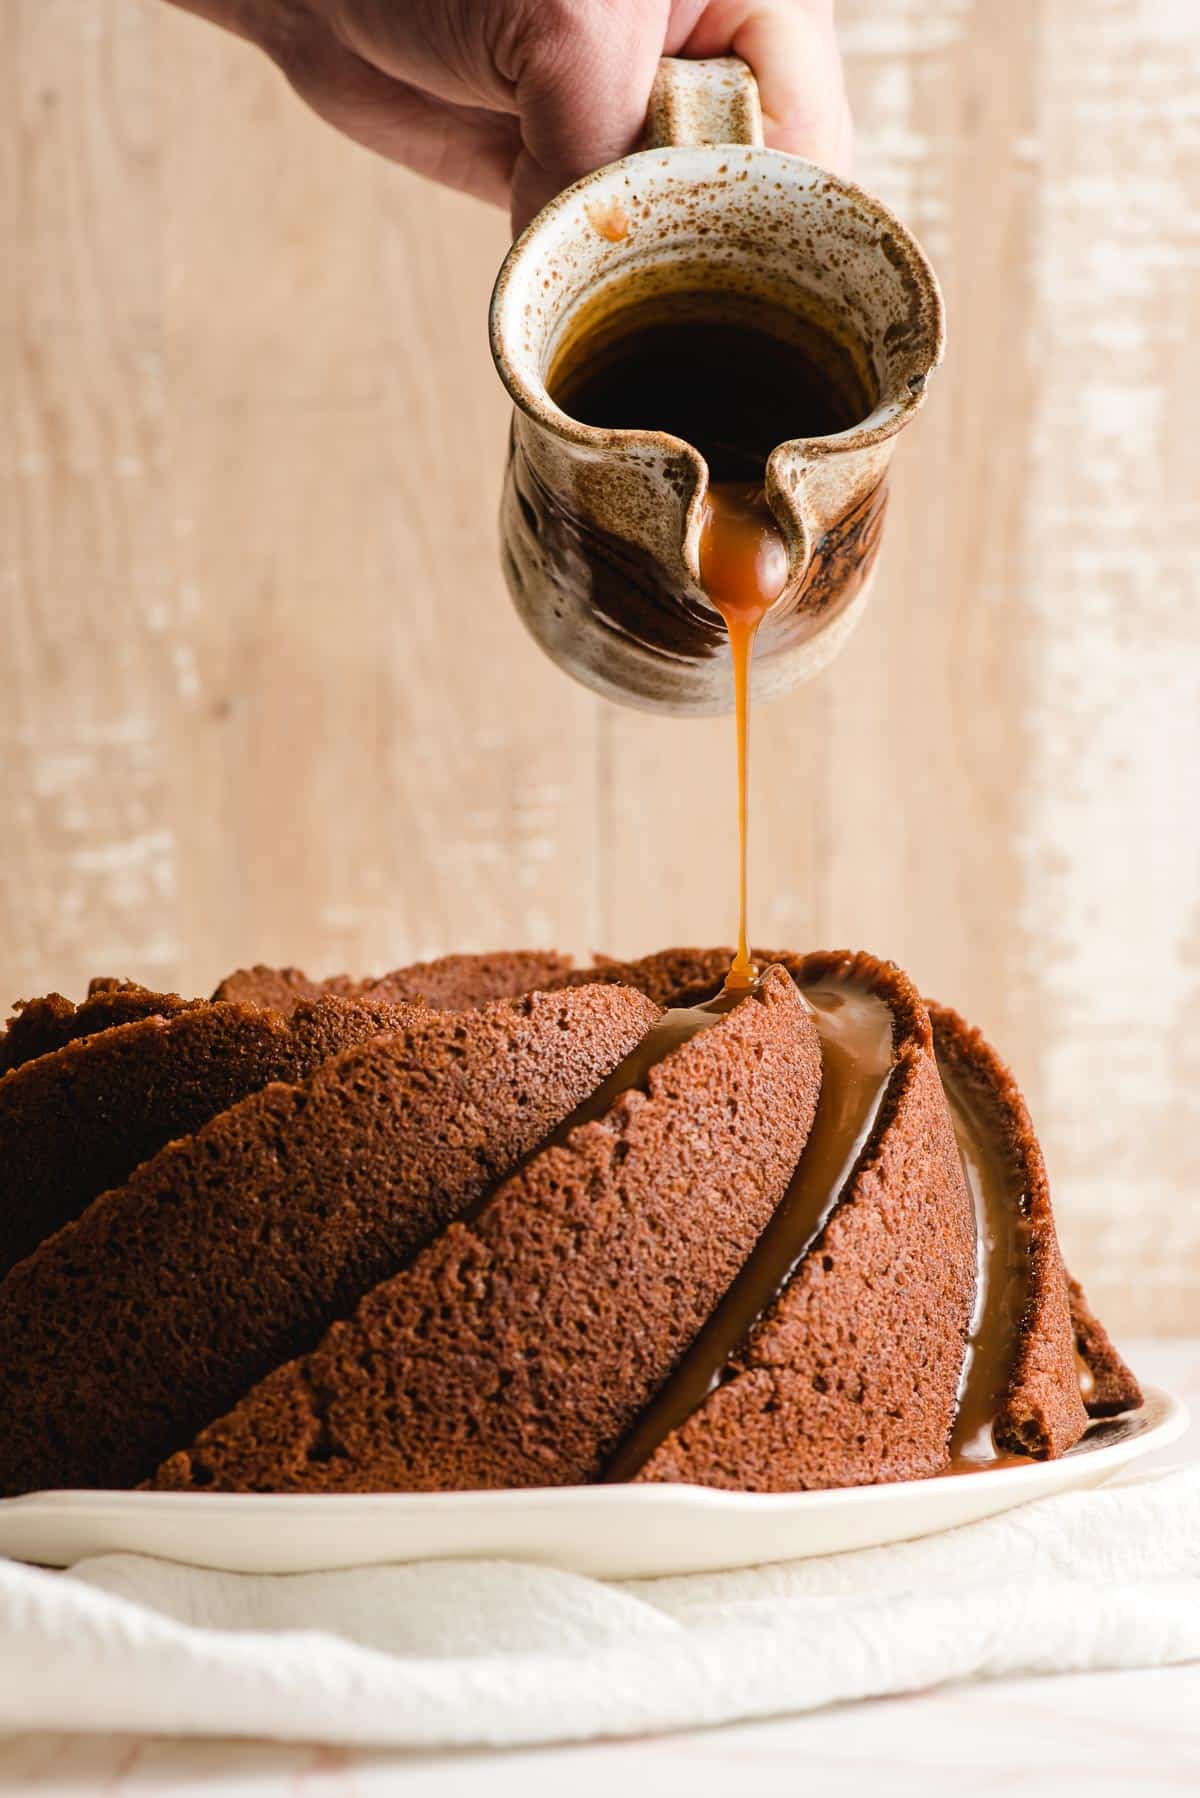 Caramel sauce is drizzled over a banana bundt cake.